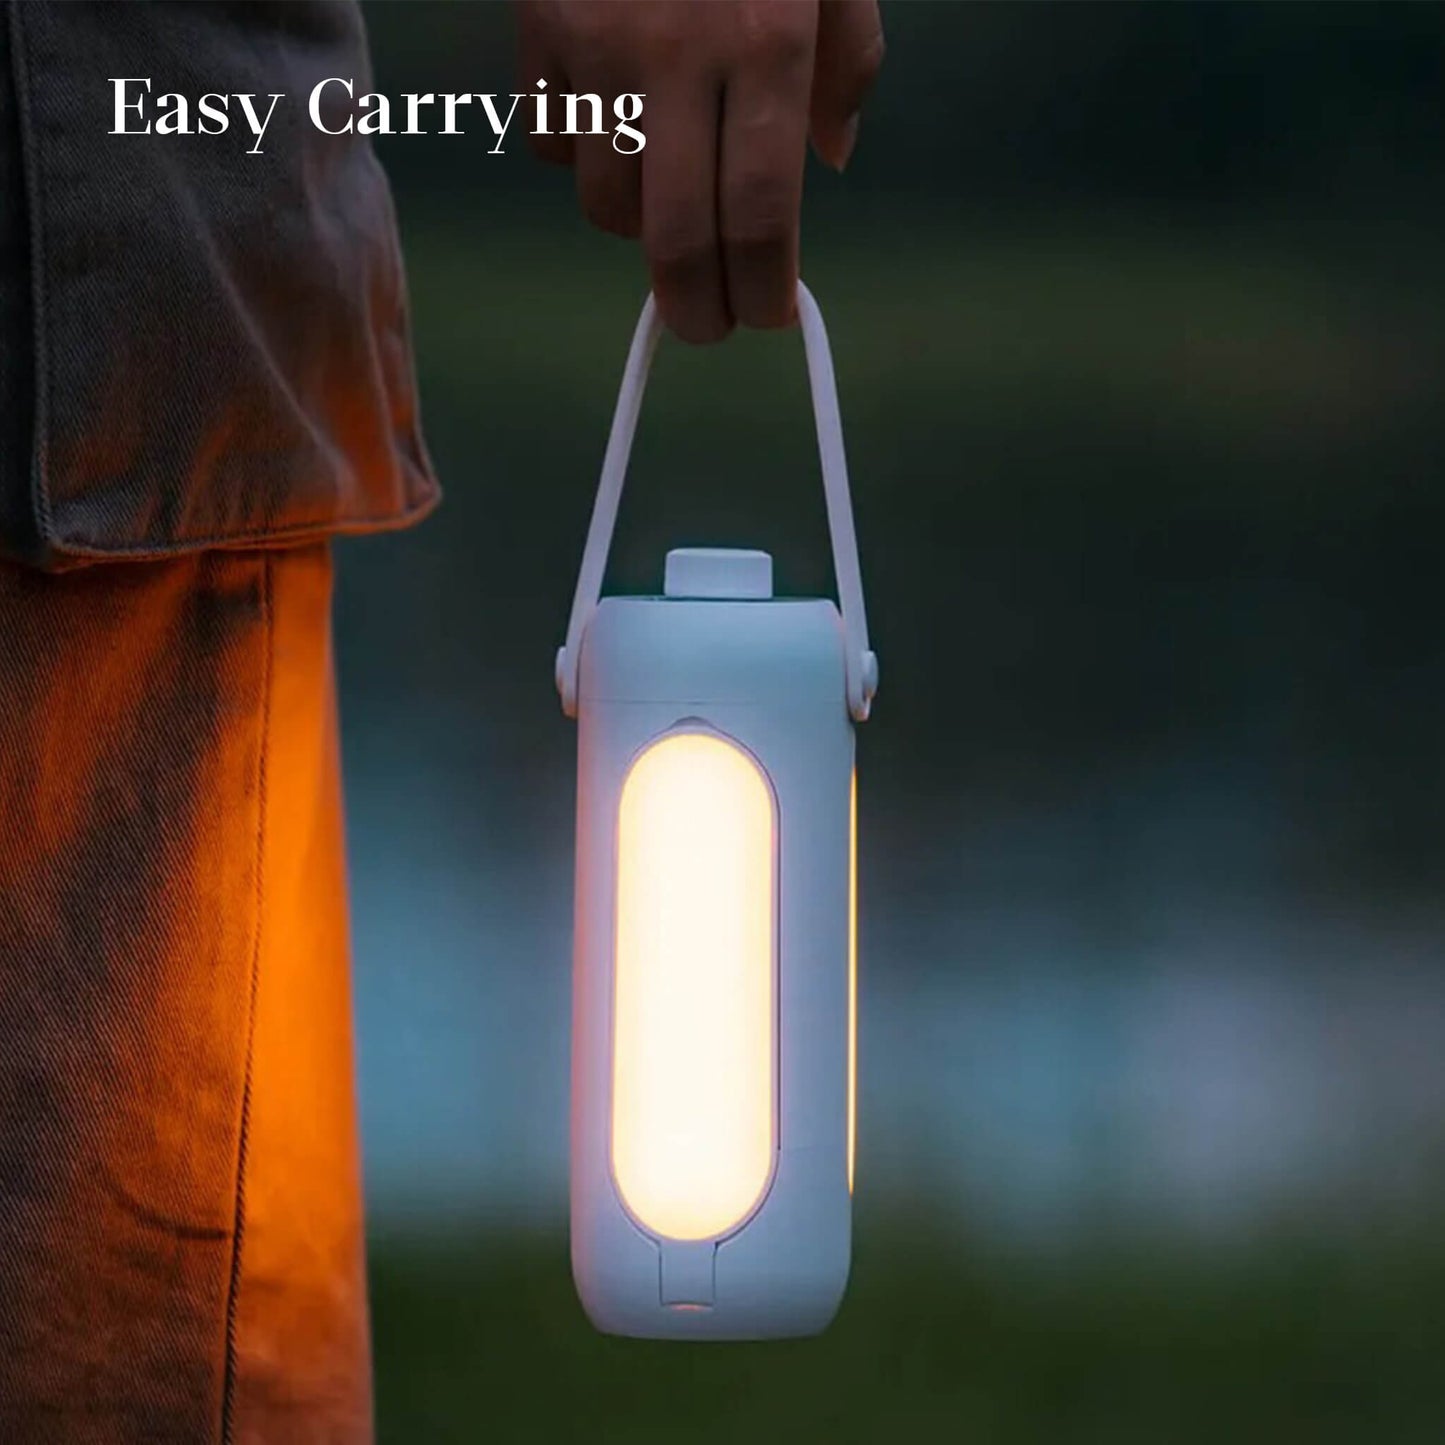 Rechargeable LED Camping Lantern - 3 Lighting Modes, 720 Lumen. The lantern's collapsible and deployable design enhances portability, making it easy to store and carry. 